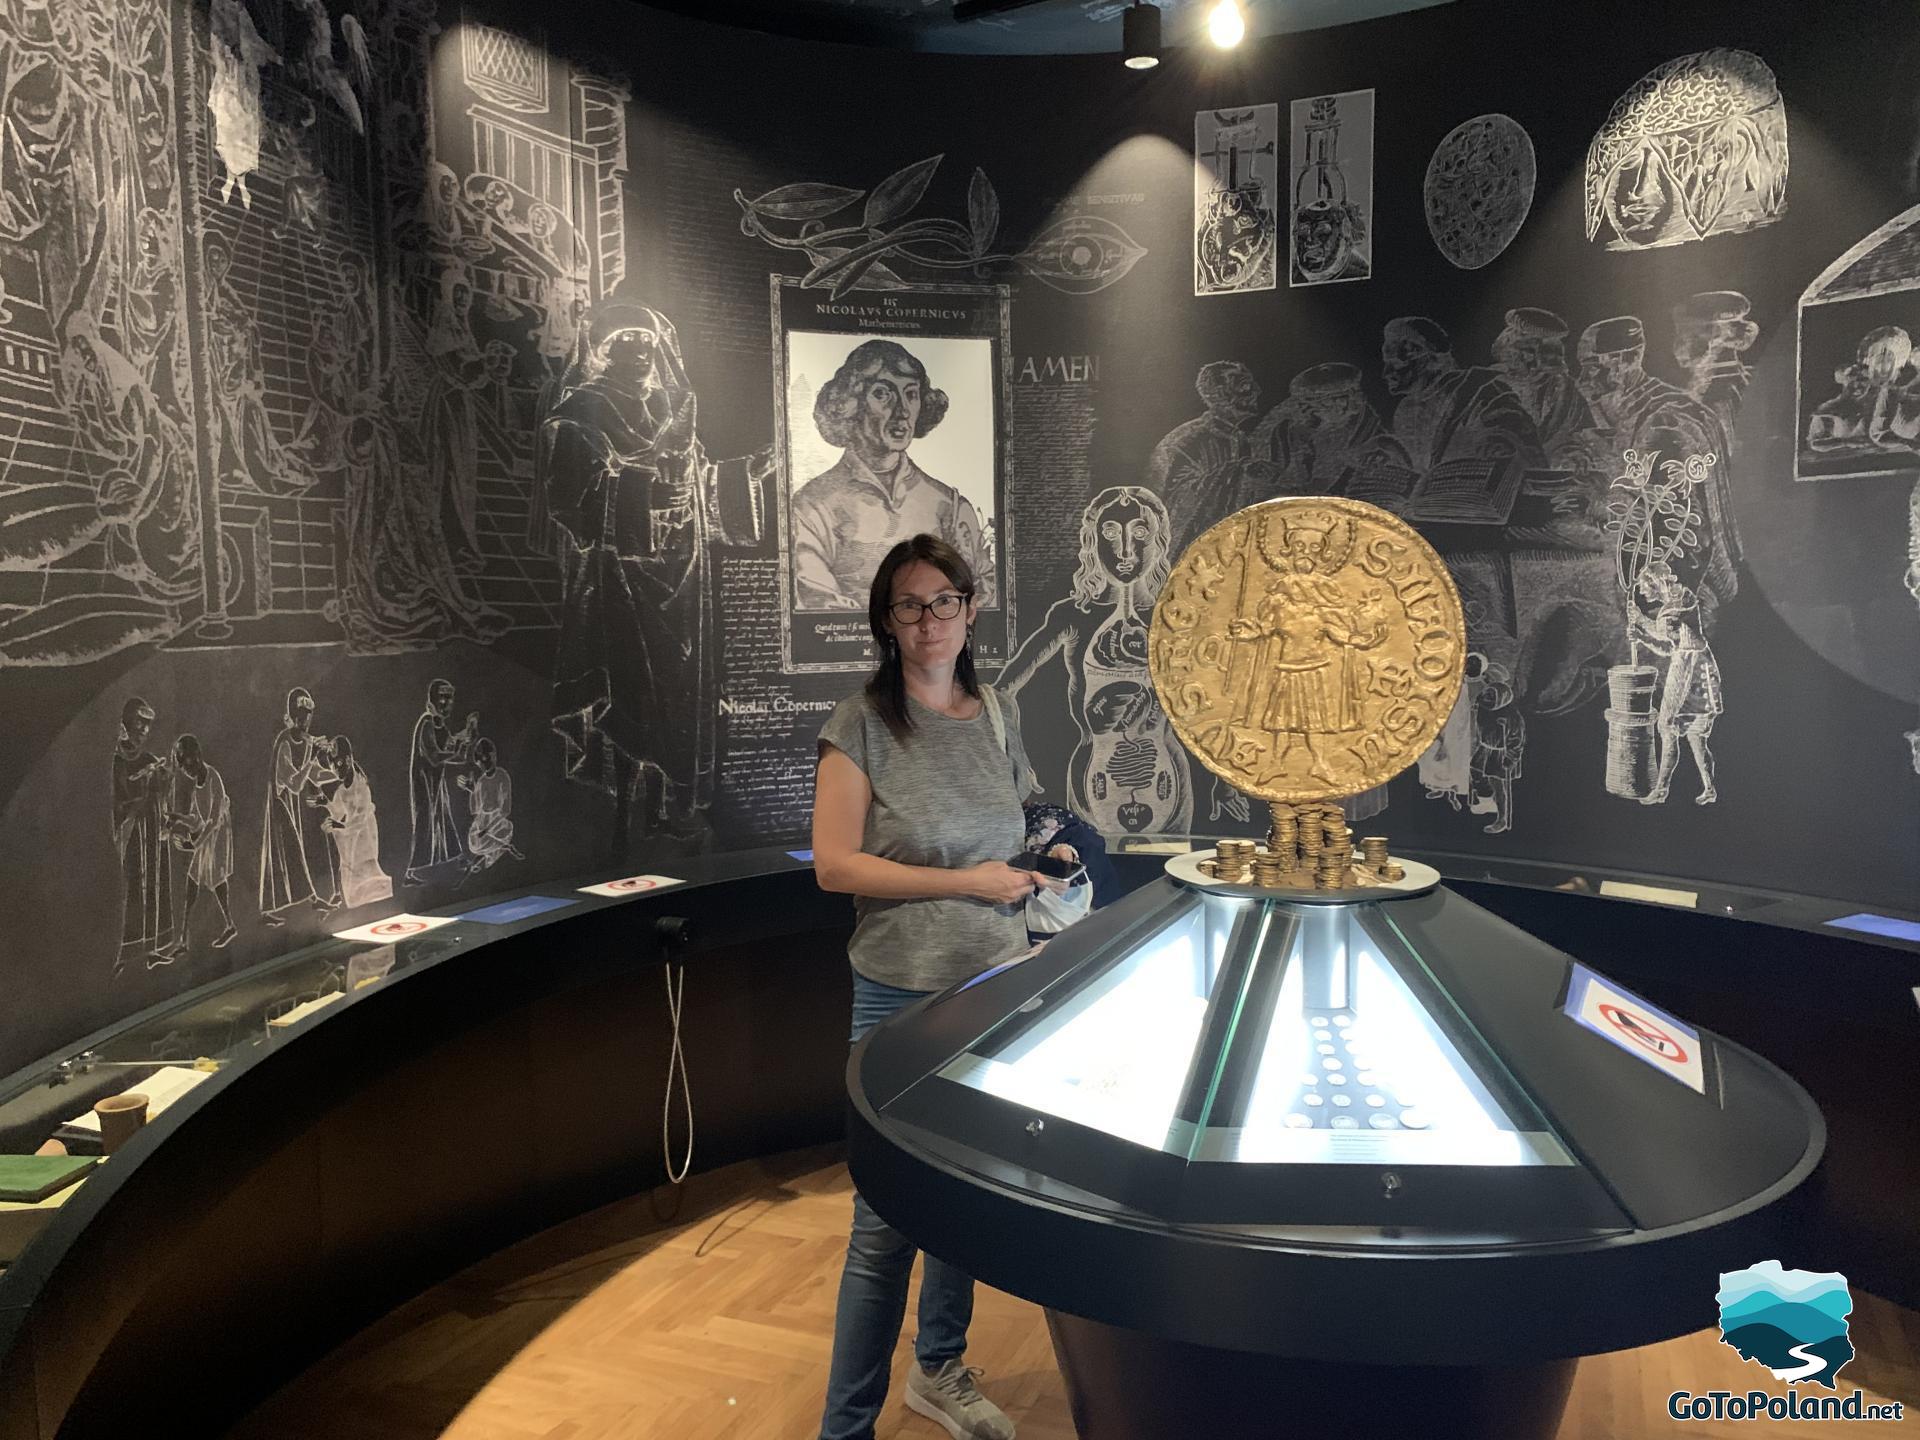 A woman is standing next to the exhibition about Copernicus